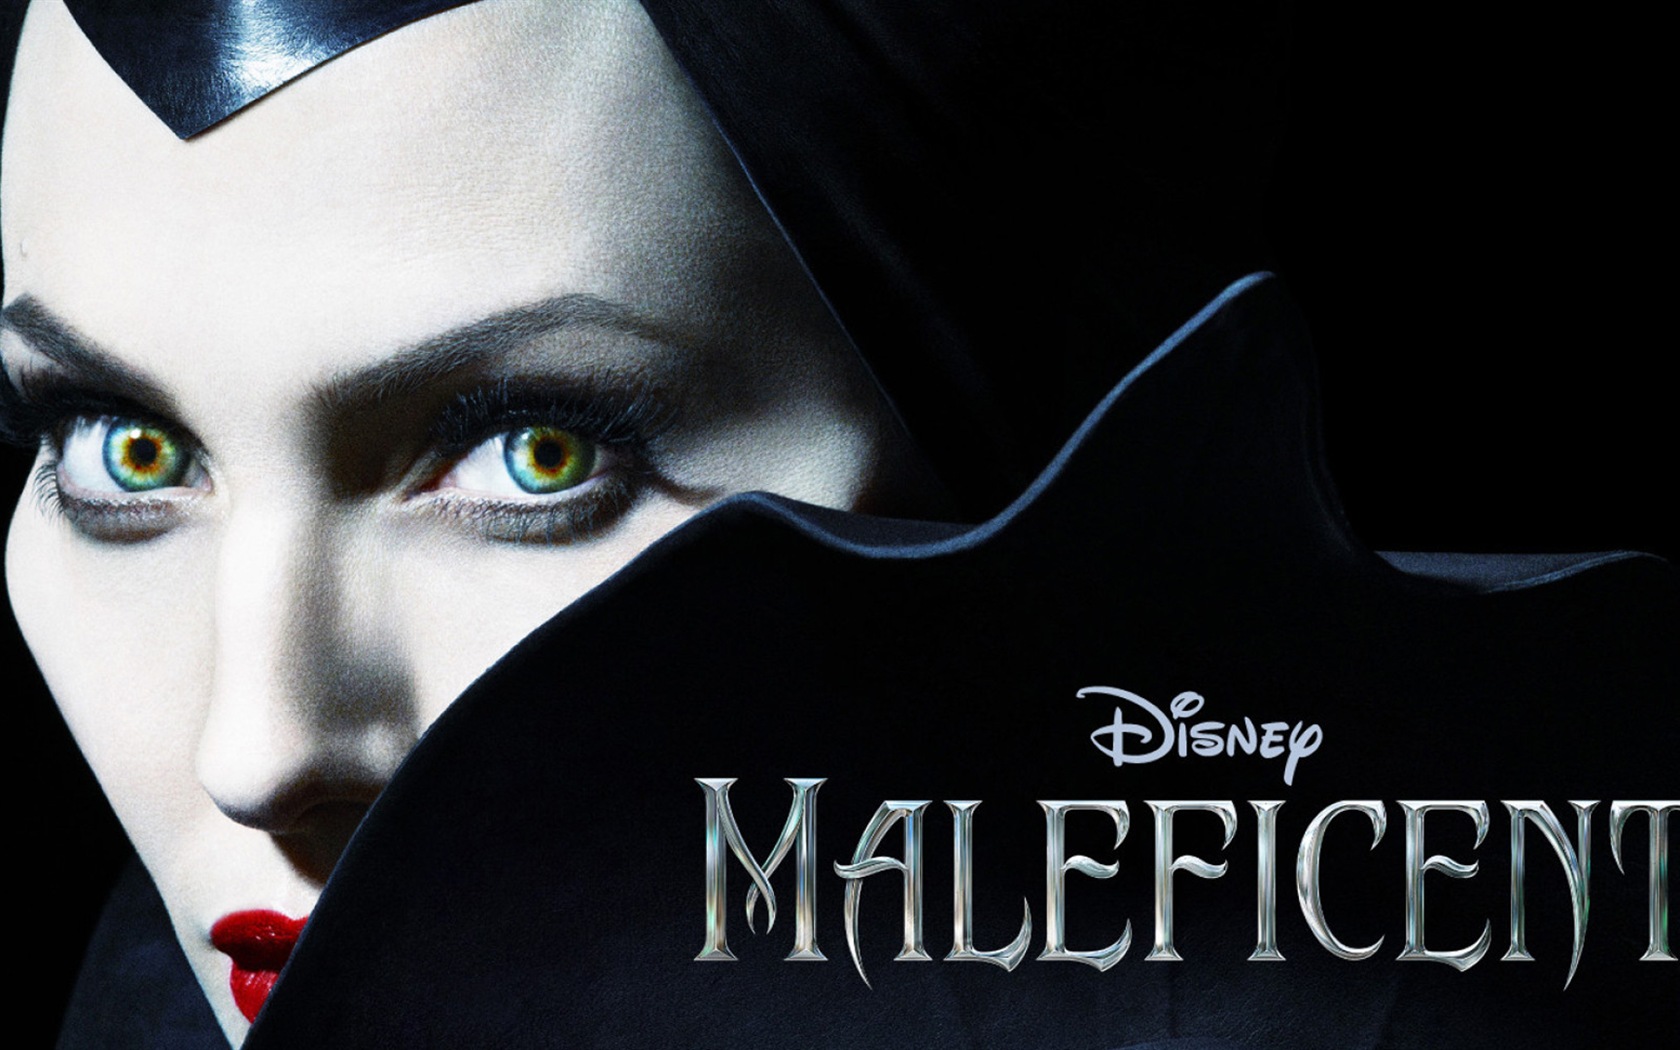 Maleficent 2014 HD movie wallpapers #14 - 1680x1050